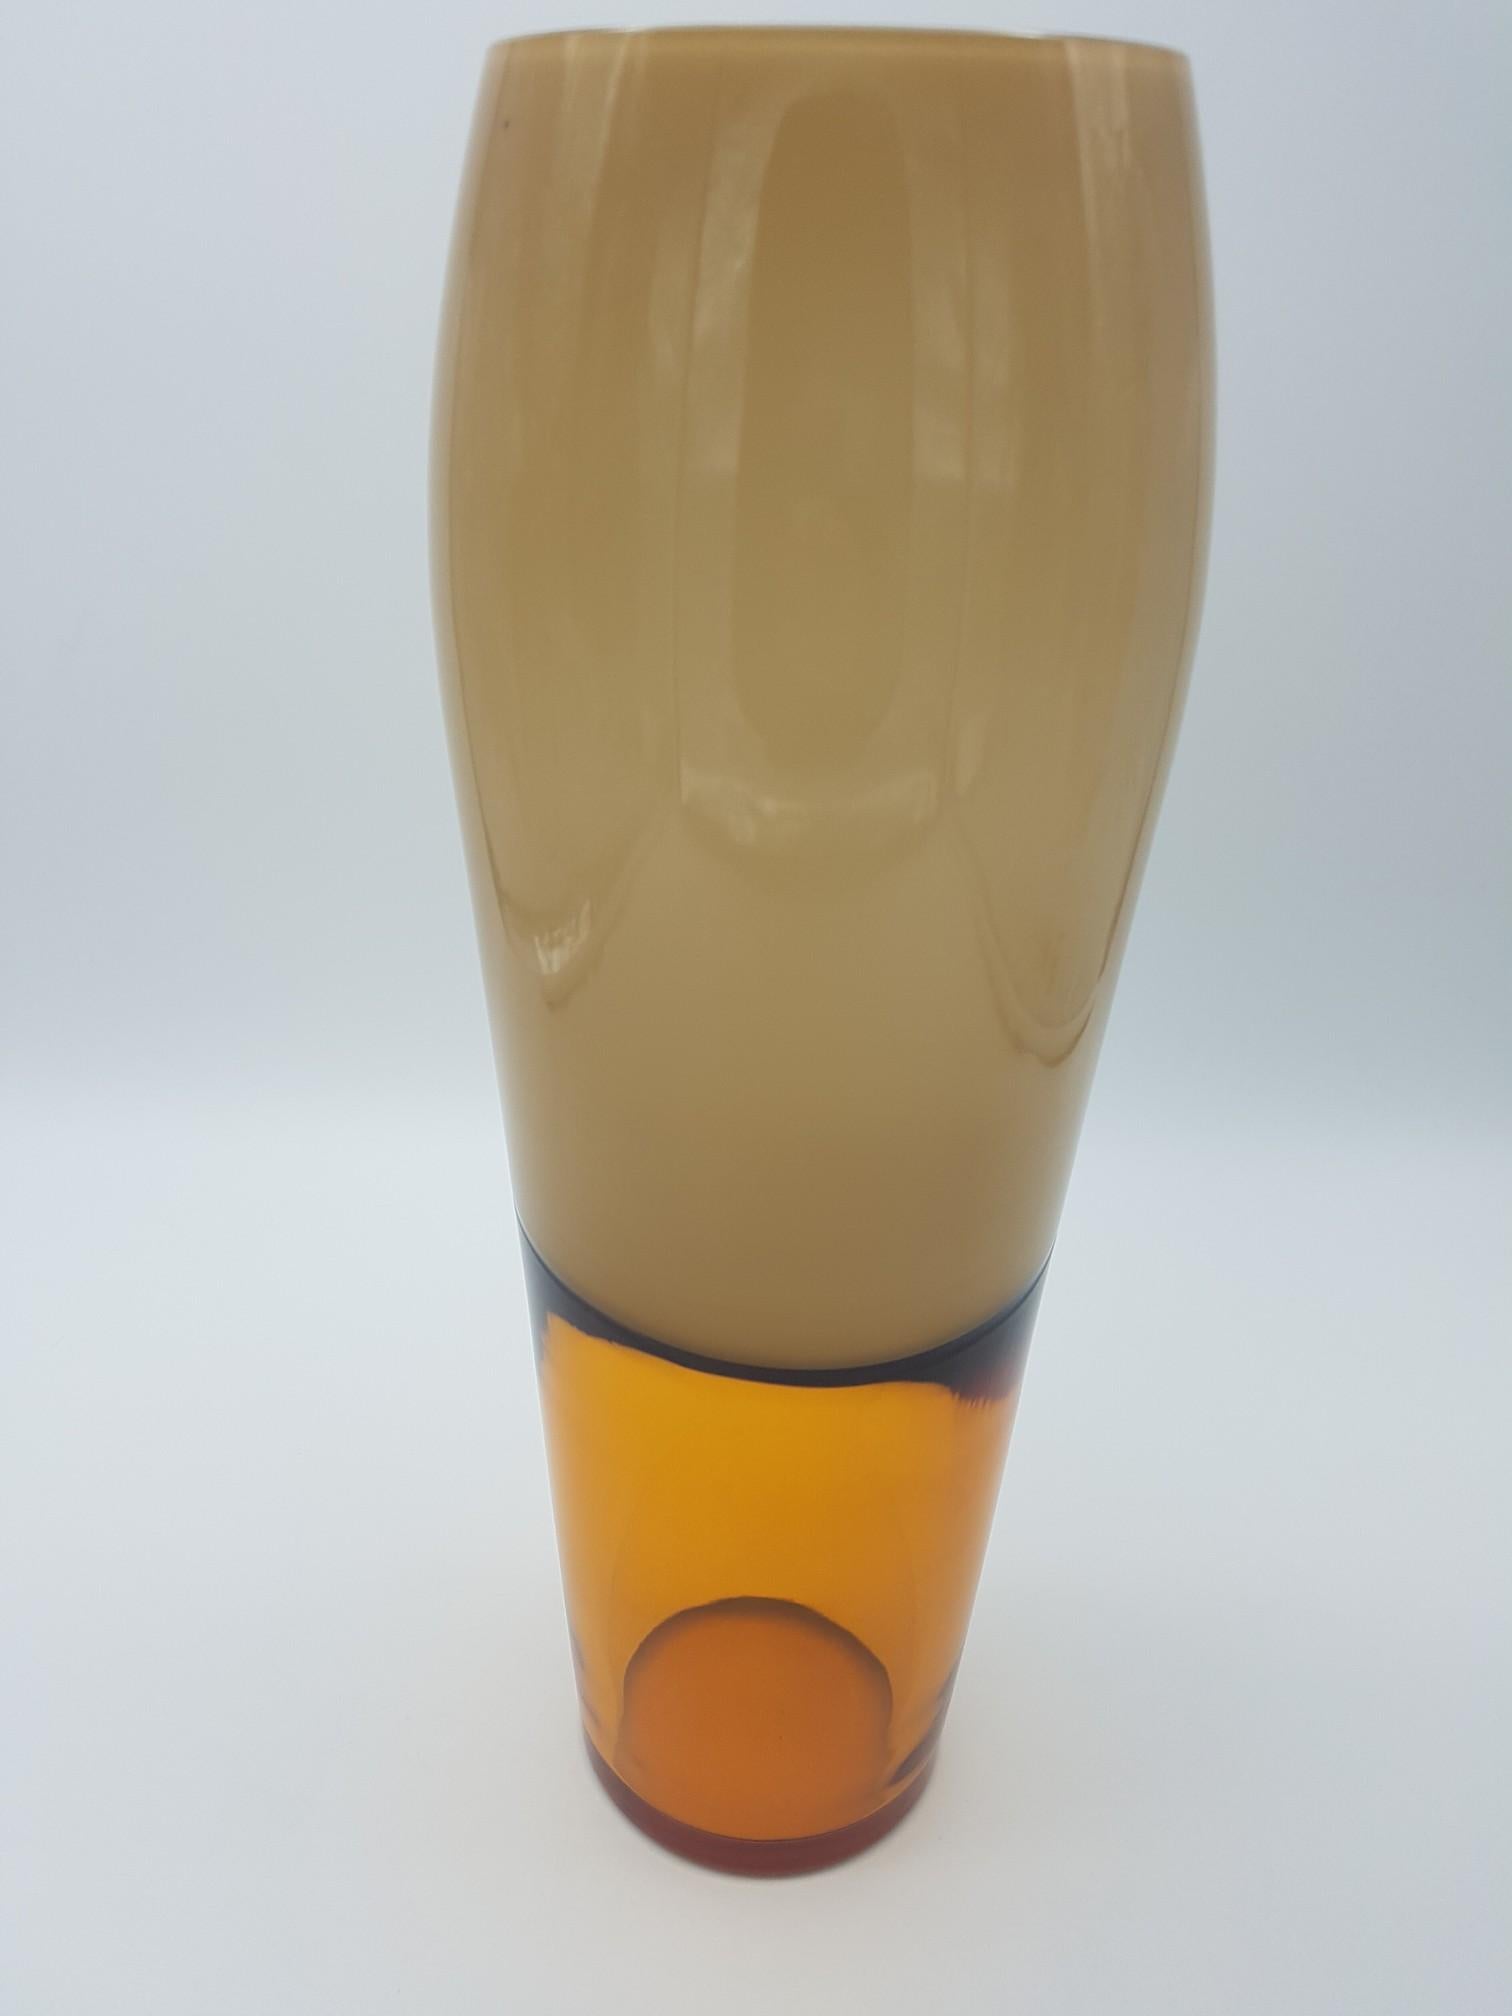 Modern Murano Glass Vase, Amber & Beige/Cream/Fawn Color 'Incalmo' by Cenedese For Sale 2